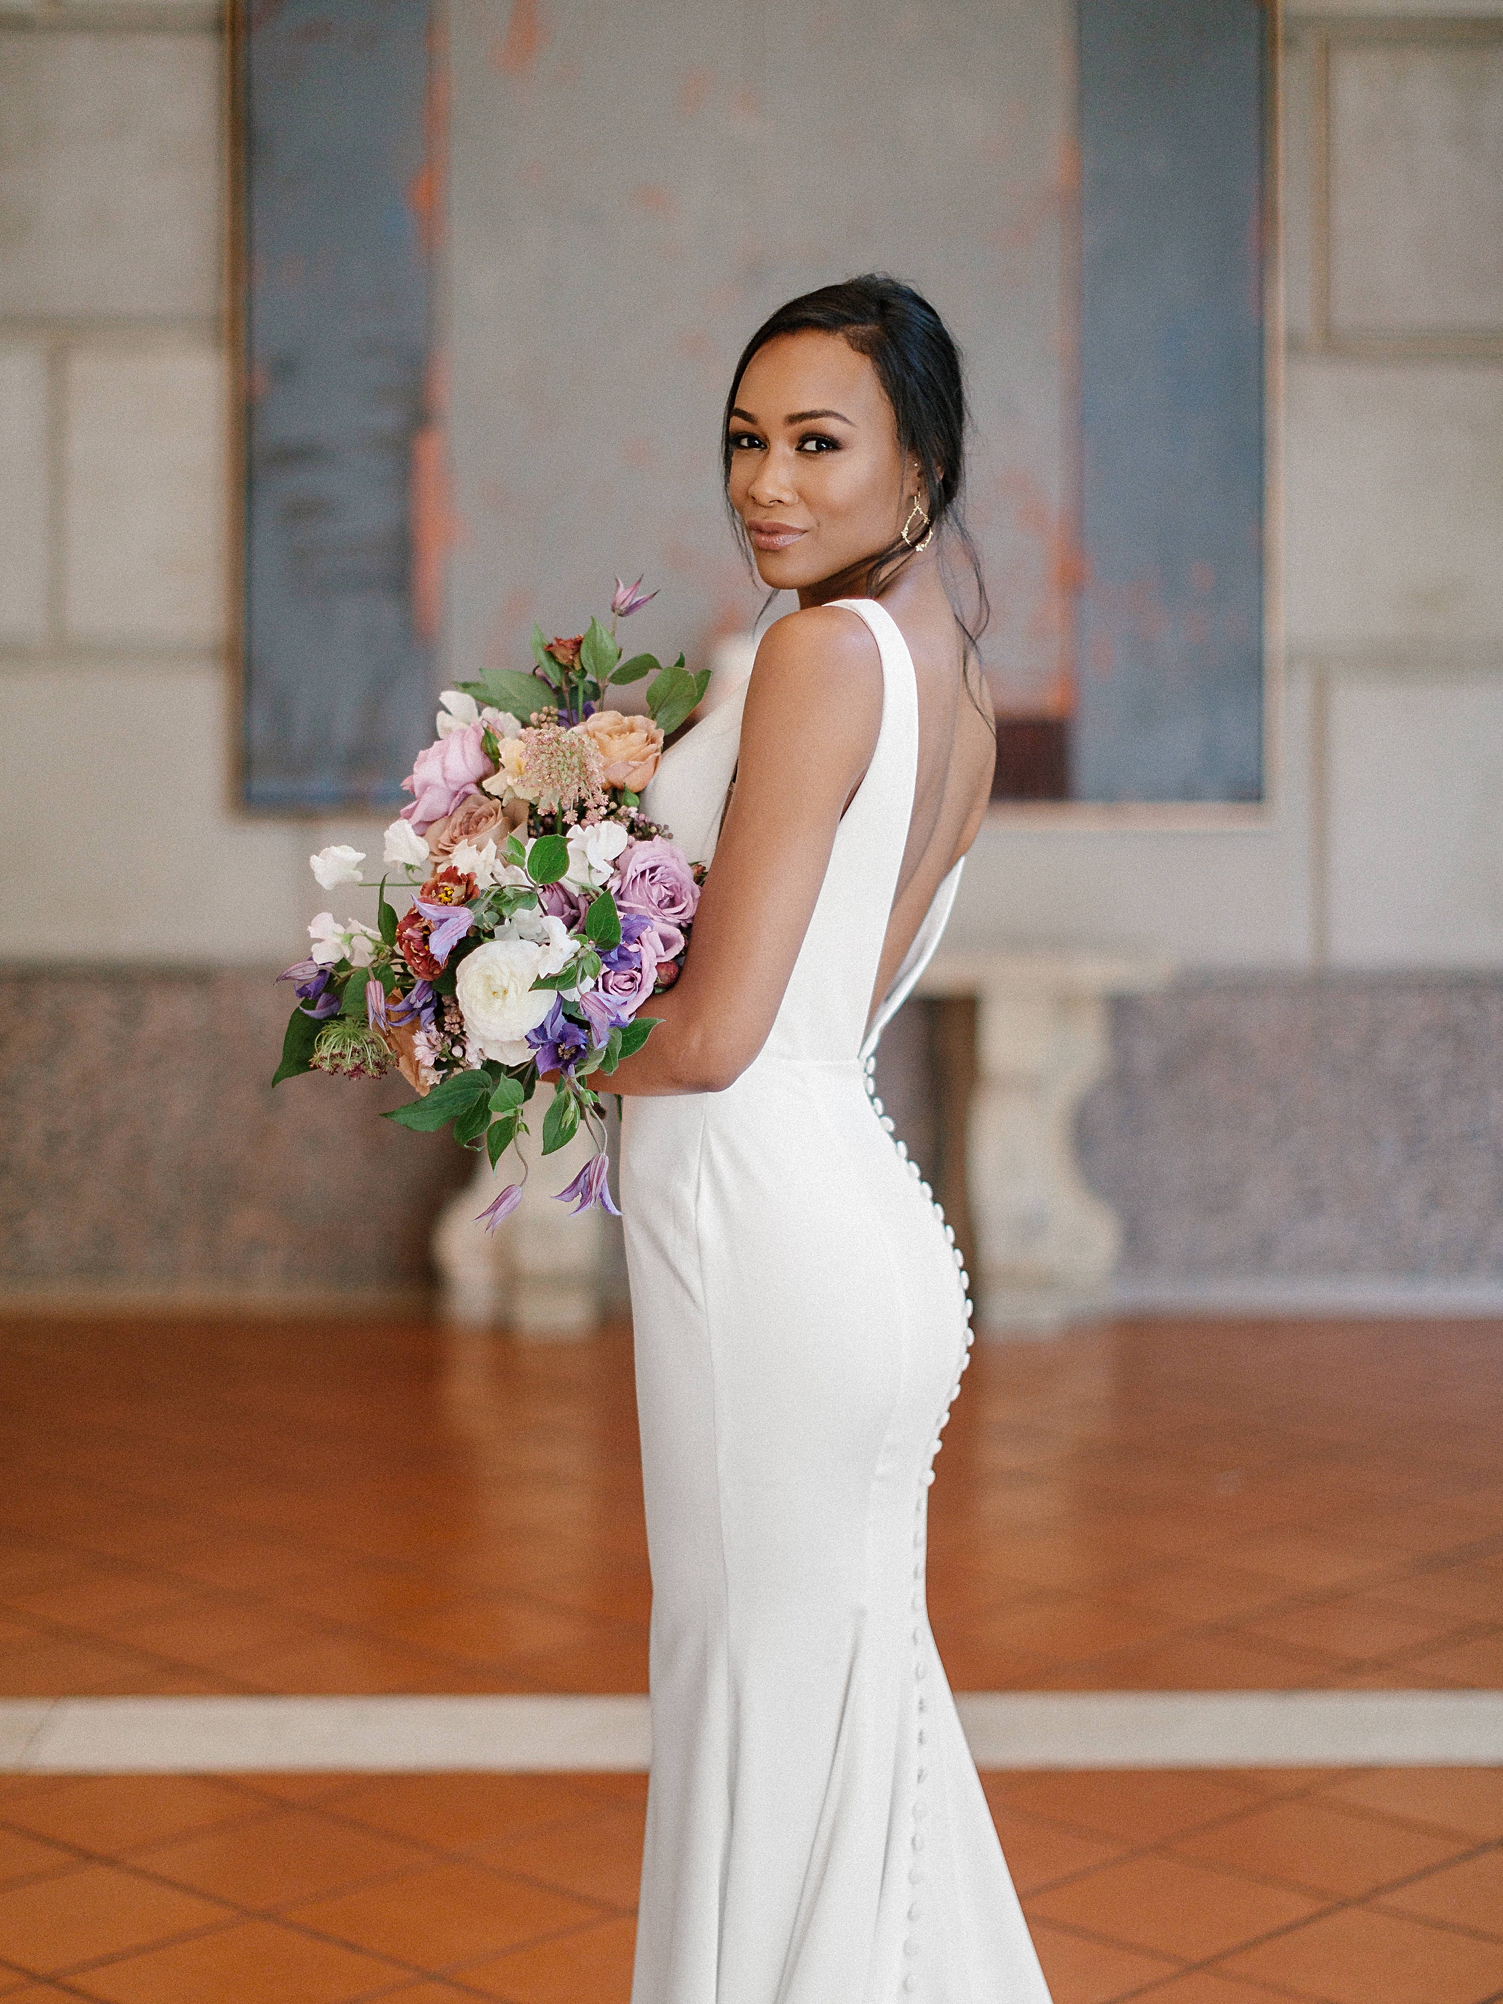 Bride in modern wedding dress holding colorful bouquet in white stone french room